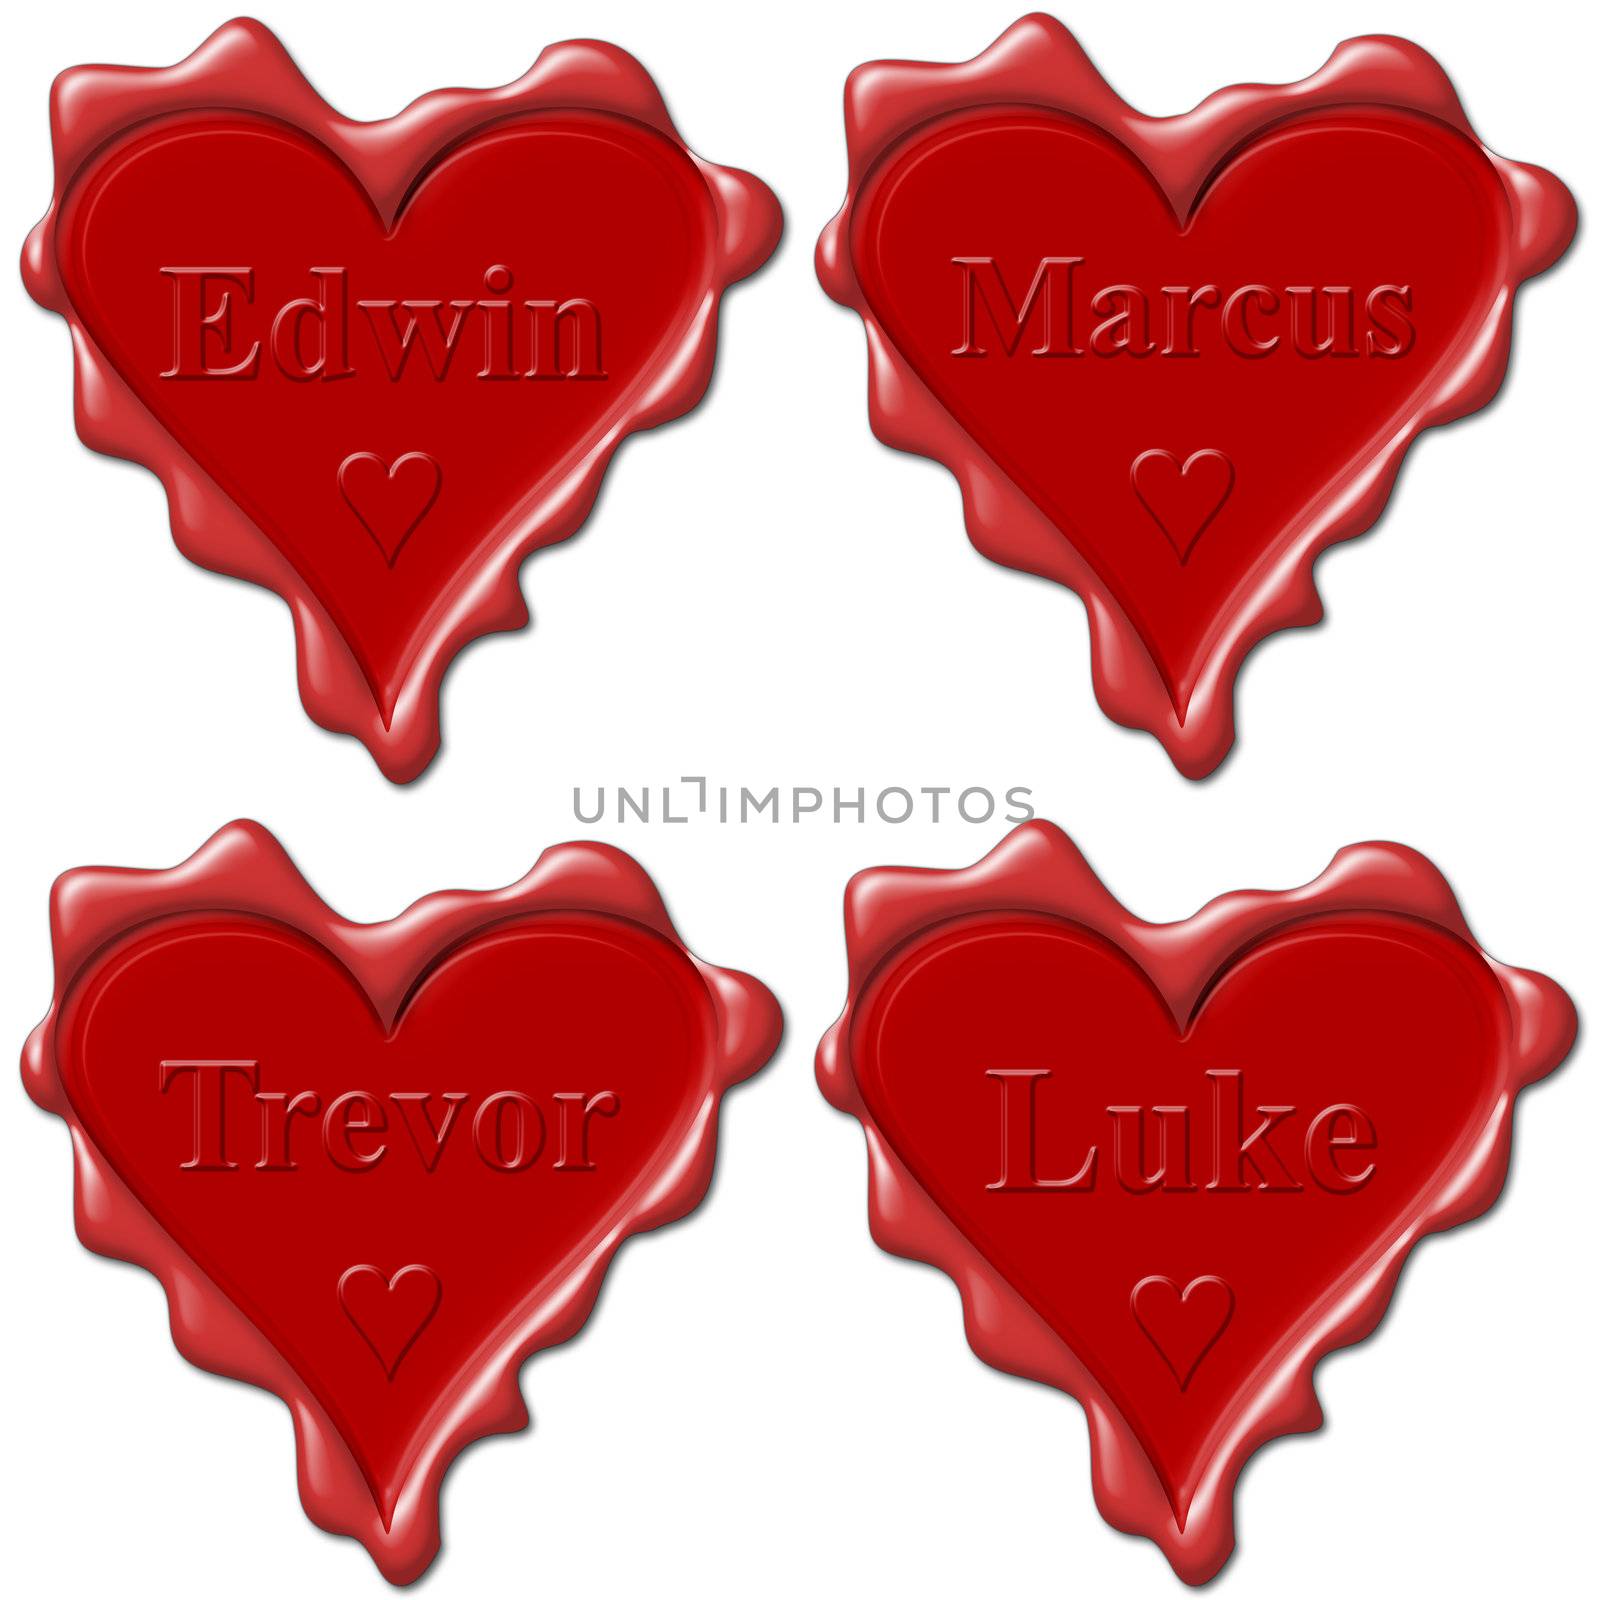 Valentine love hearts with names: Edwin, Marcus, Trevor, Luke by mozzyb